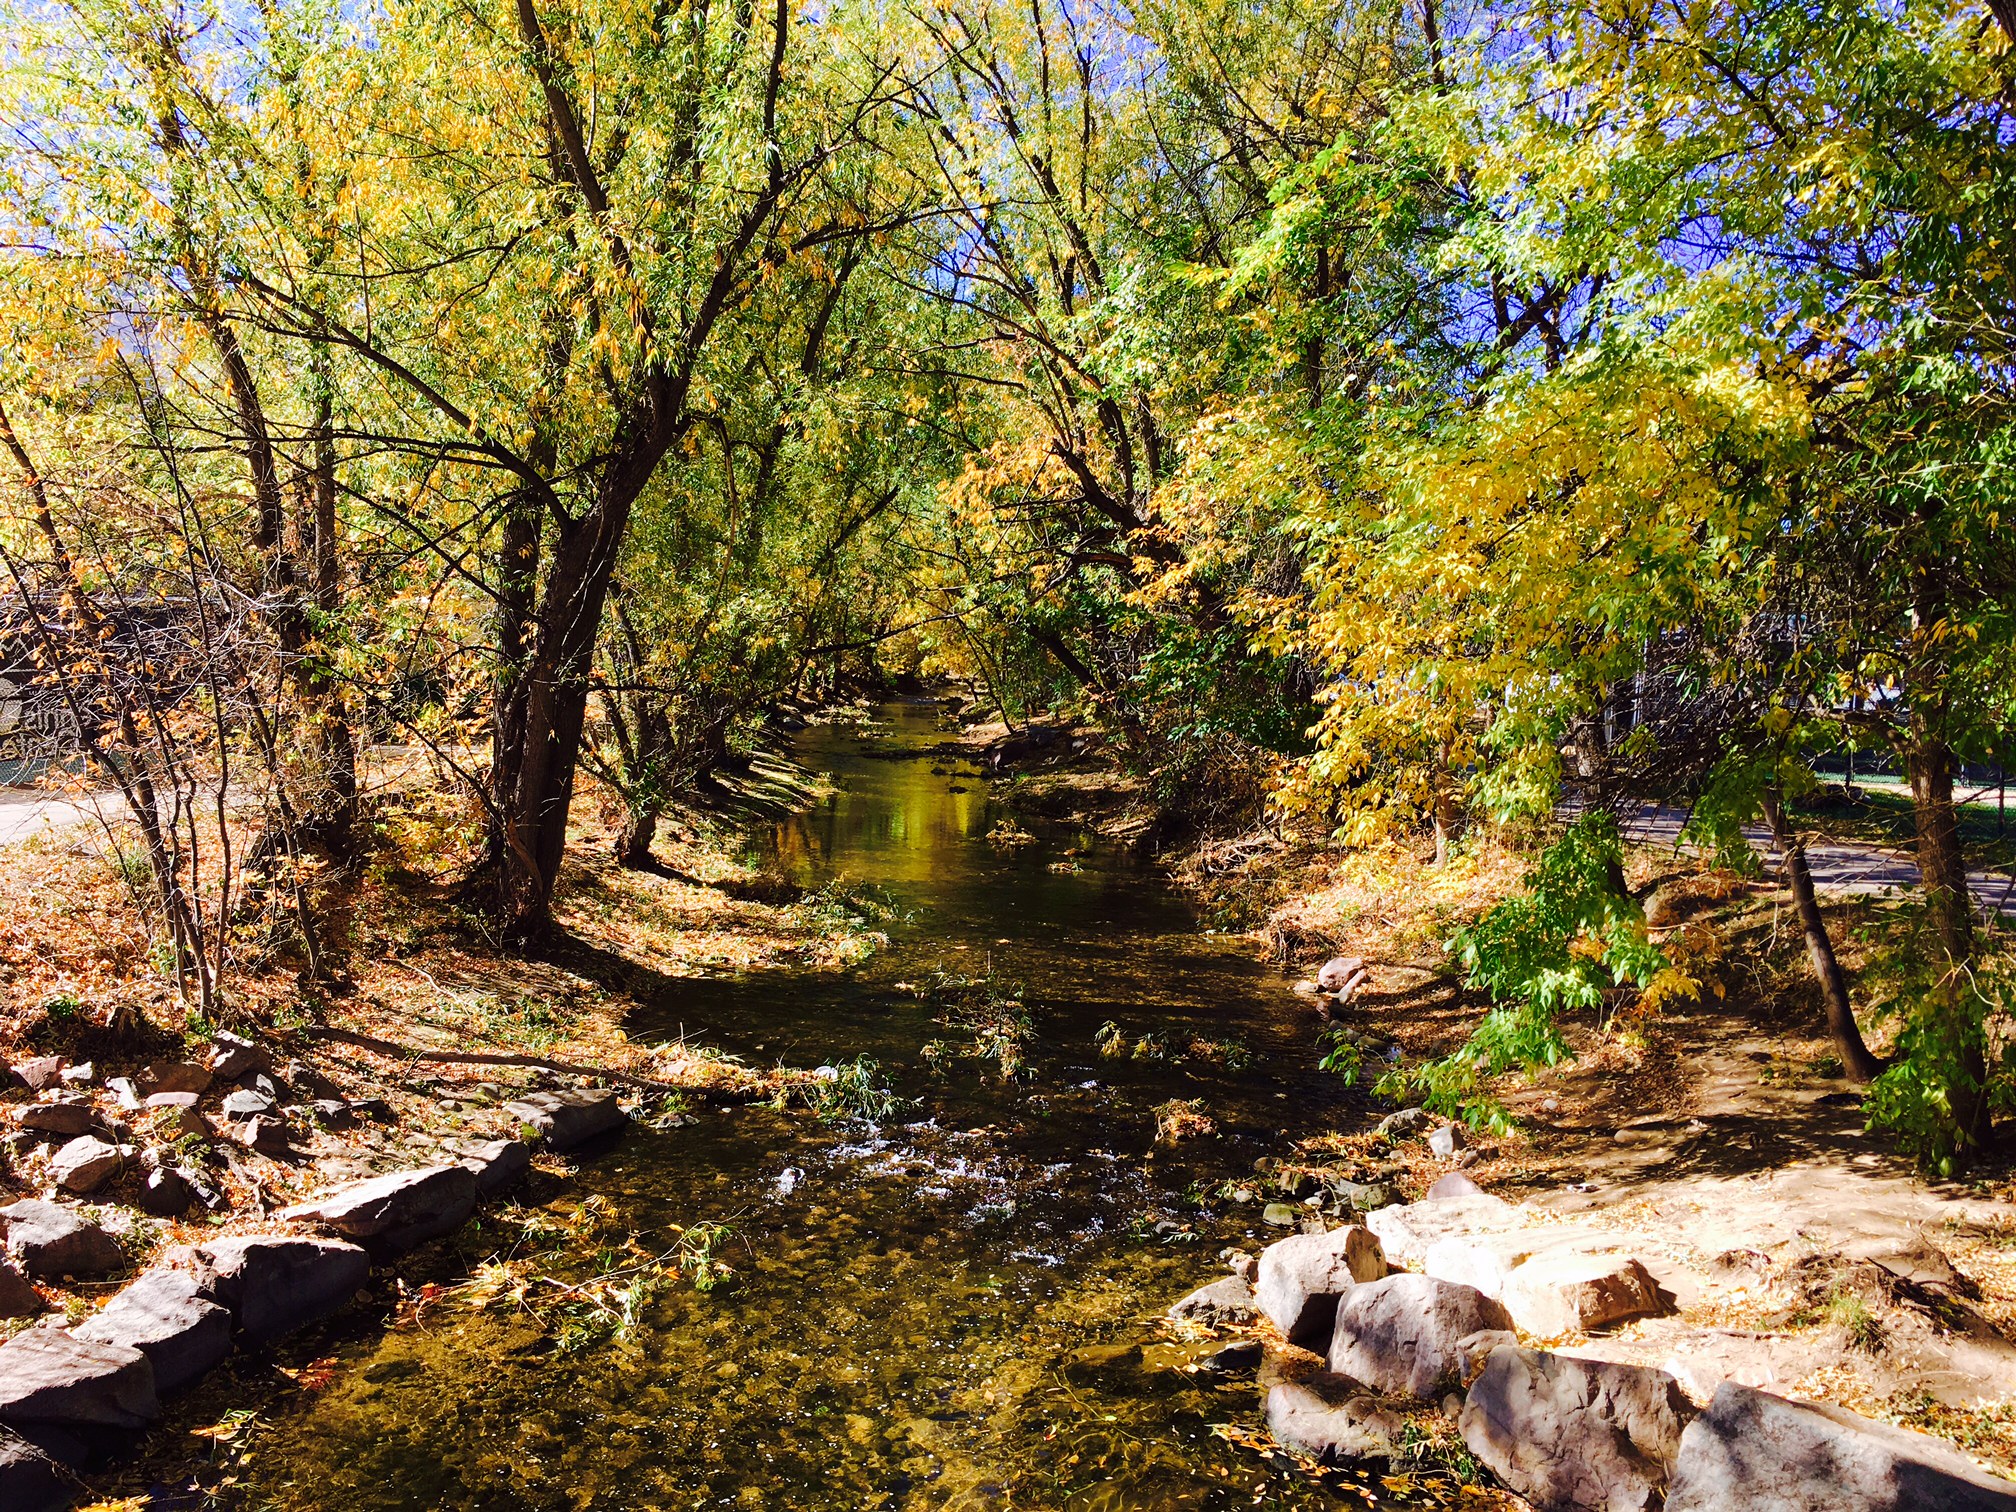 Photo of a creek running over rocks. Trees line the creek, their leaves yellow and green.